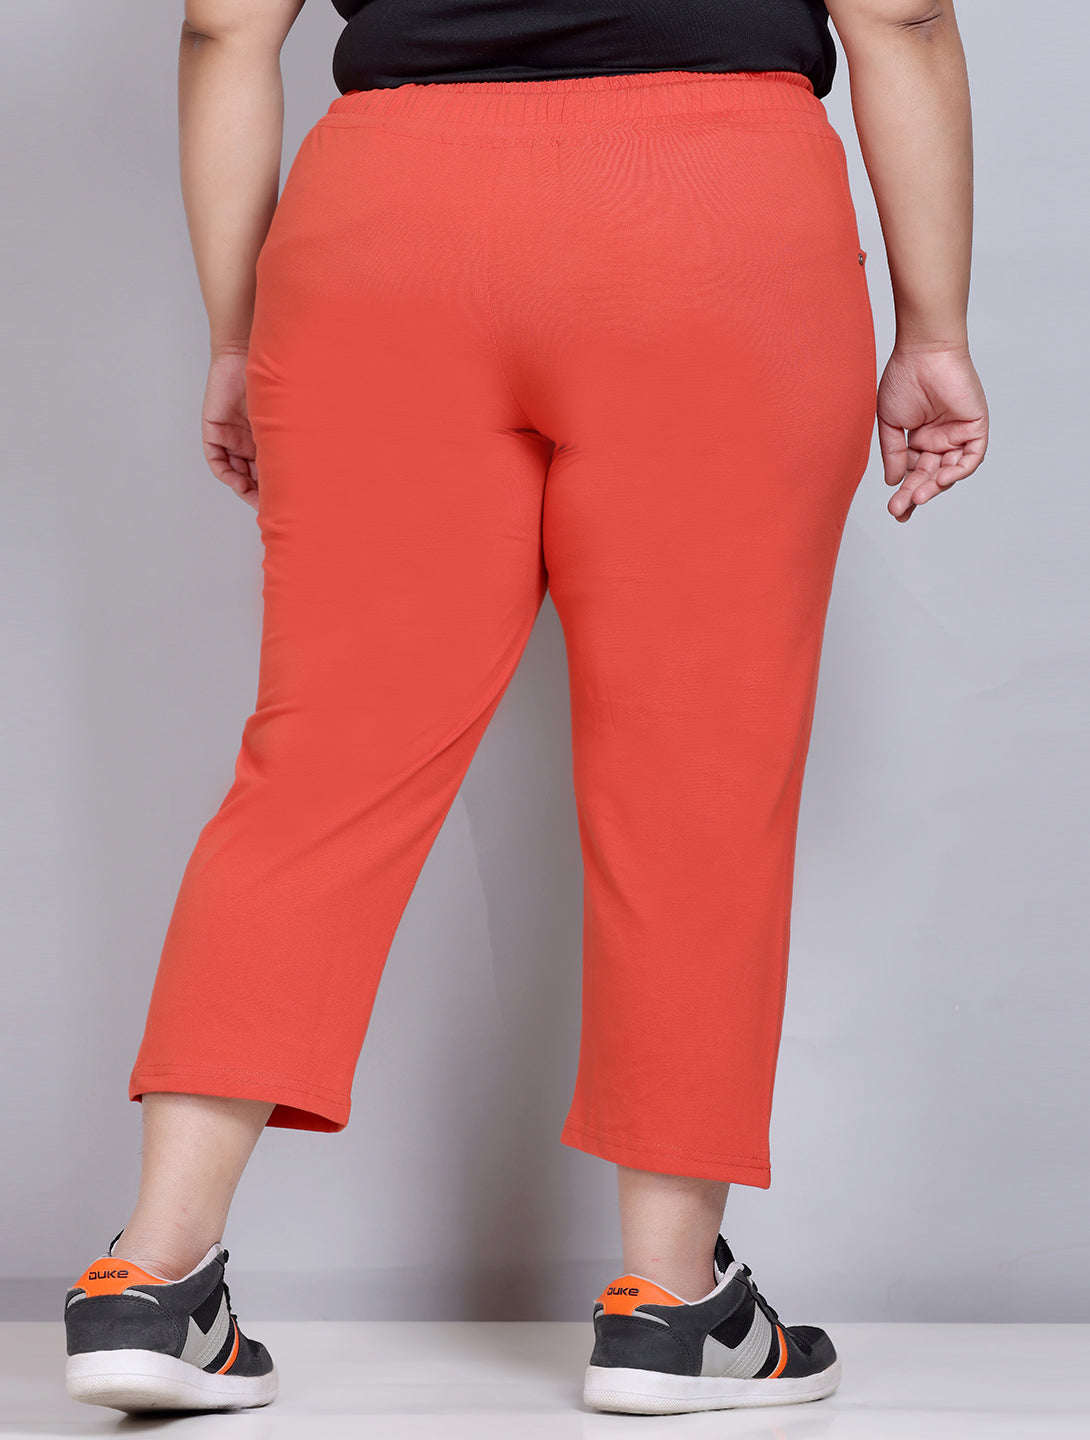 Buy Comfy Red Half Cotton Capri Pants For Women Online In India By  Cupidclothing's – Cupid Clothings